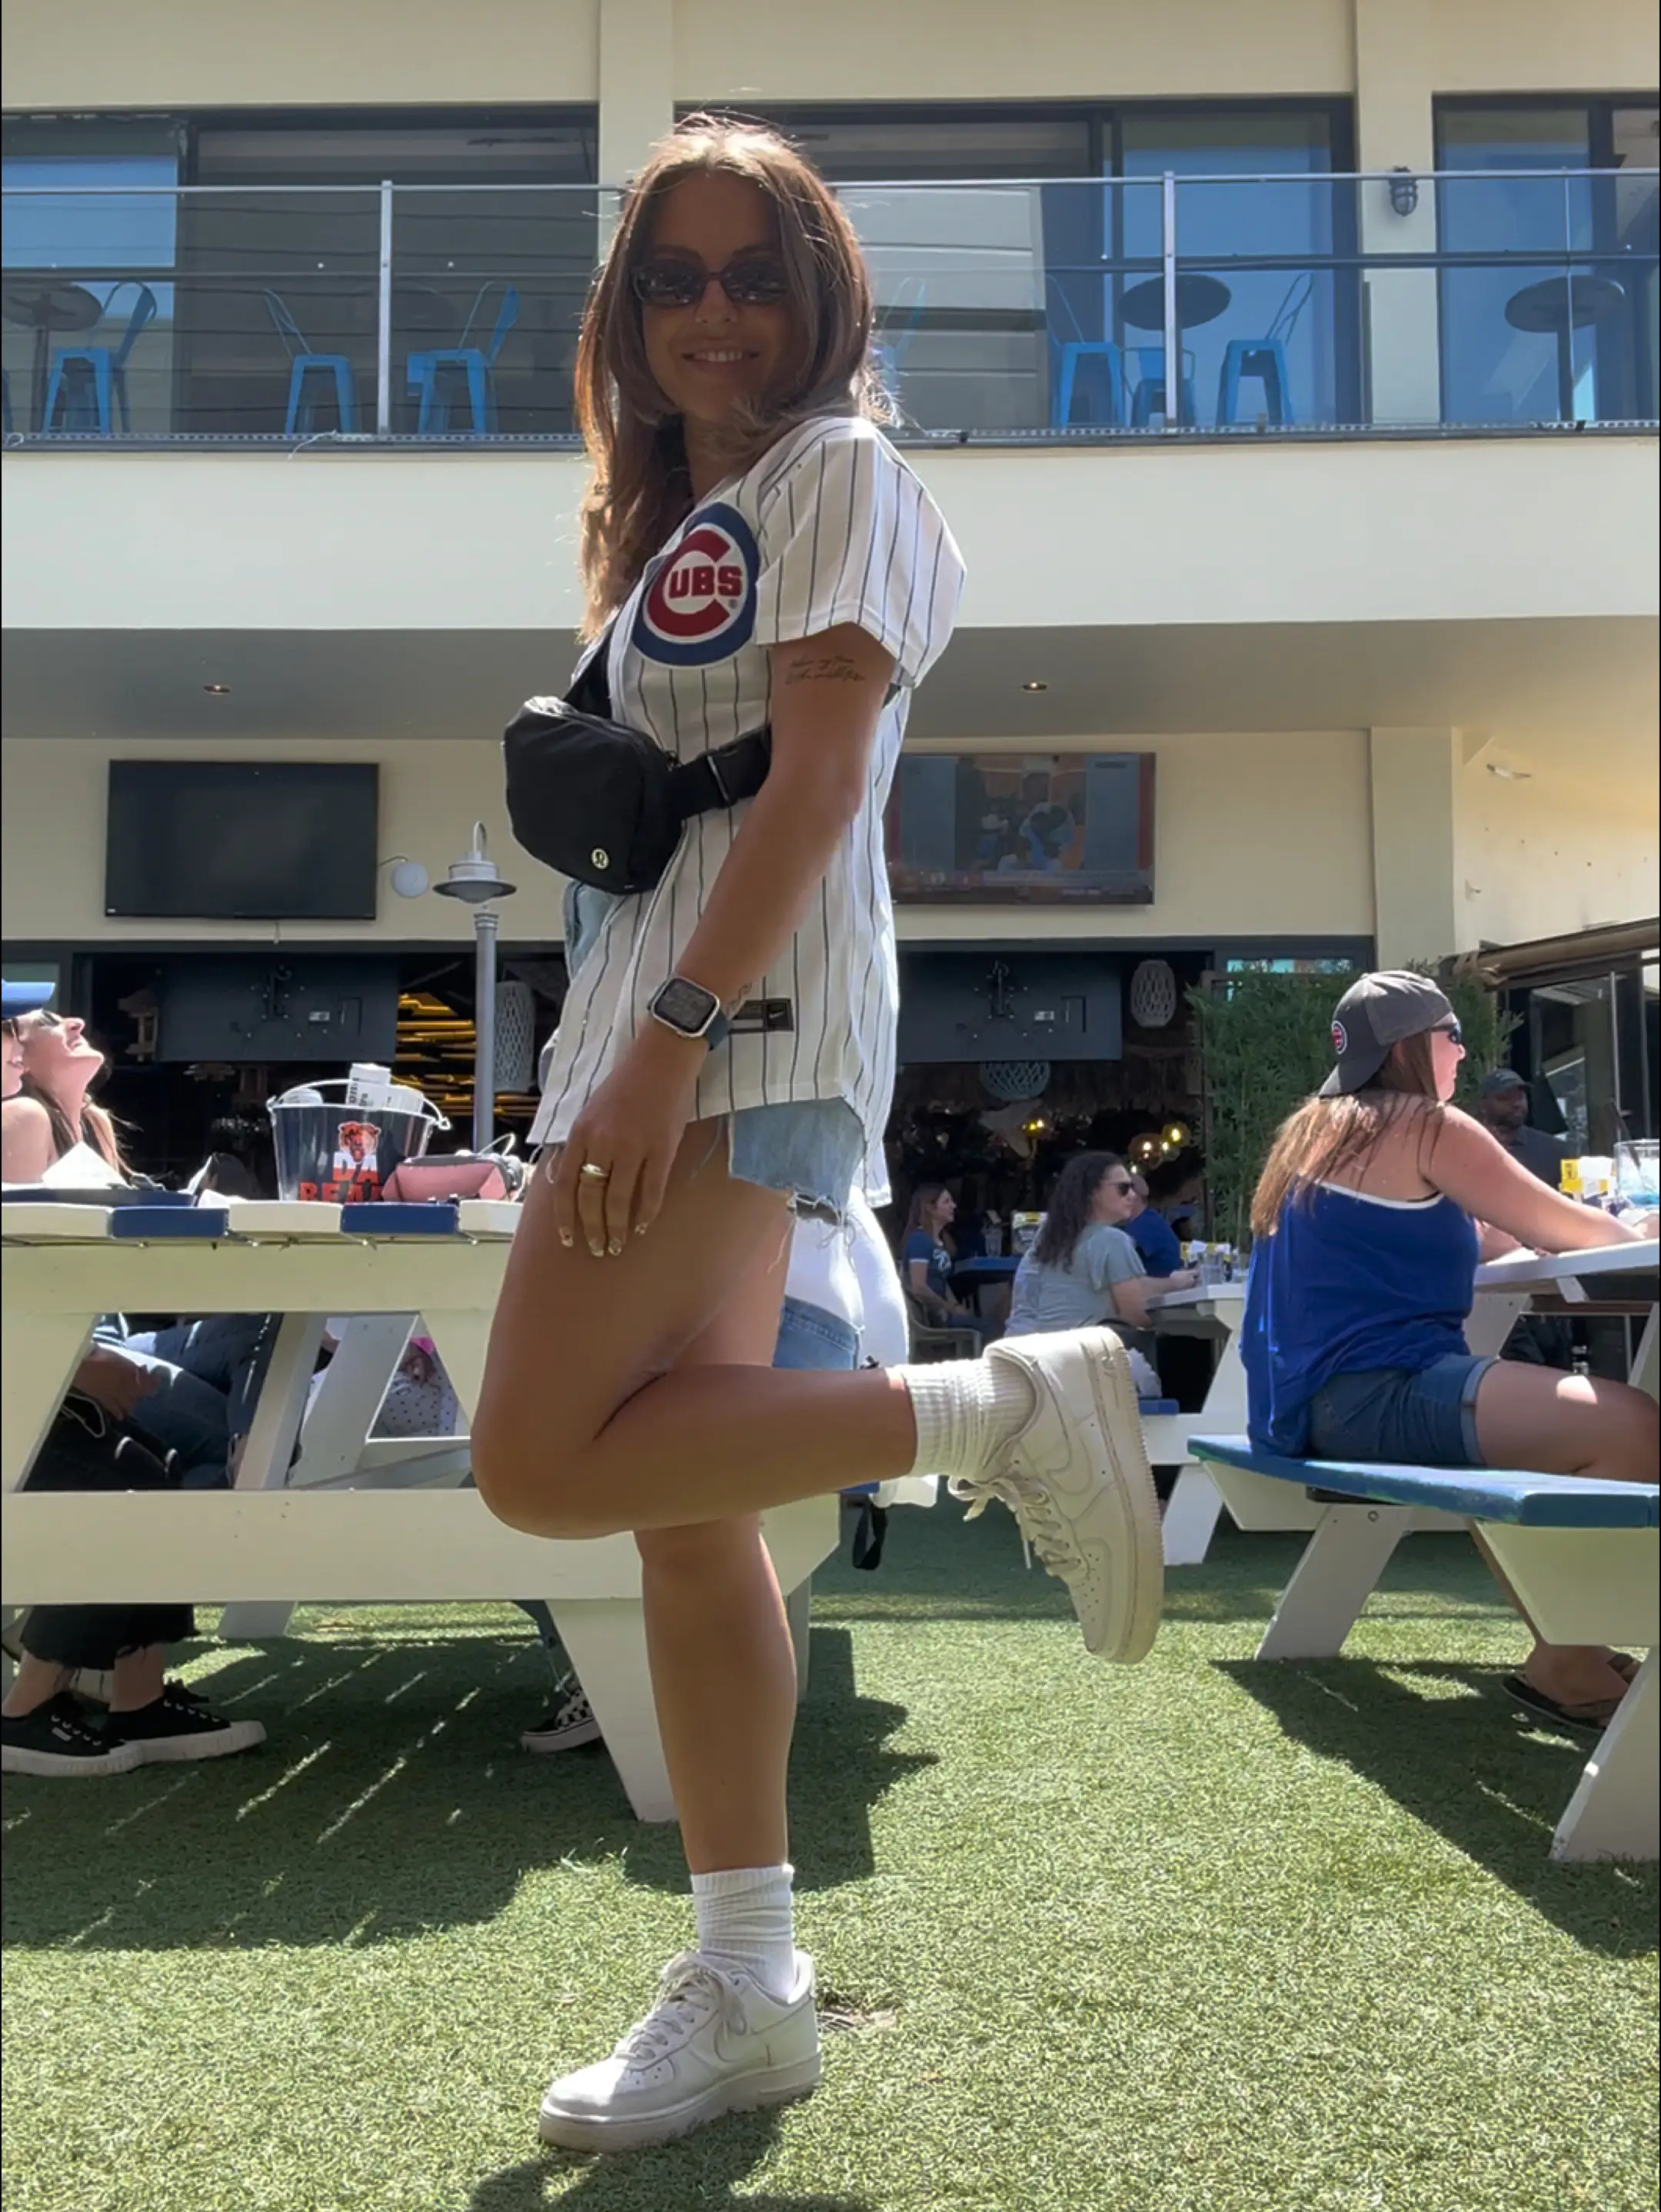 cubs game, what to wear to a cubs game, what to wear to a baseball game,  Chicago cubs, baseball game outfit ide…